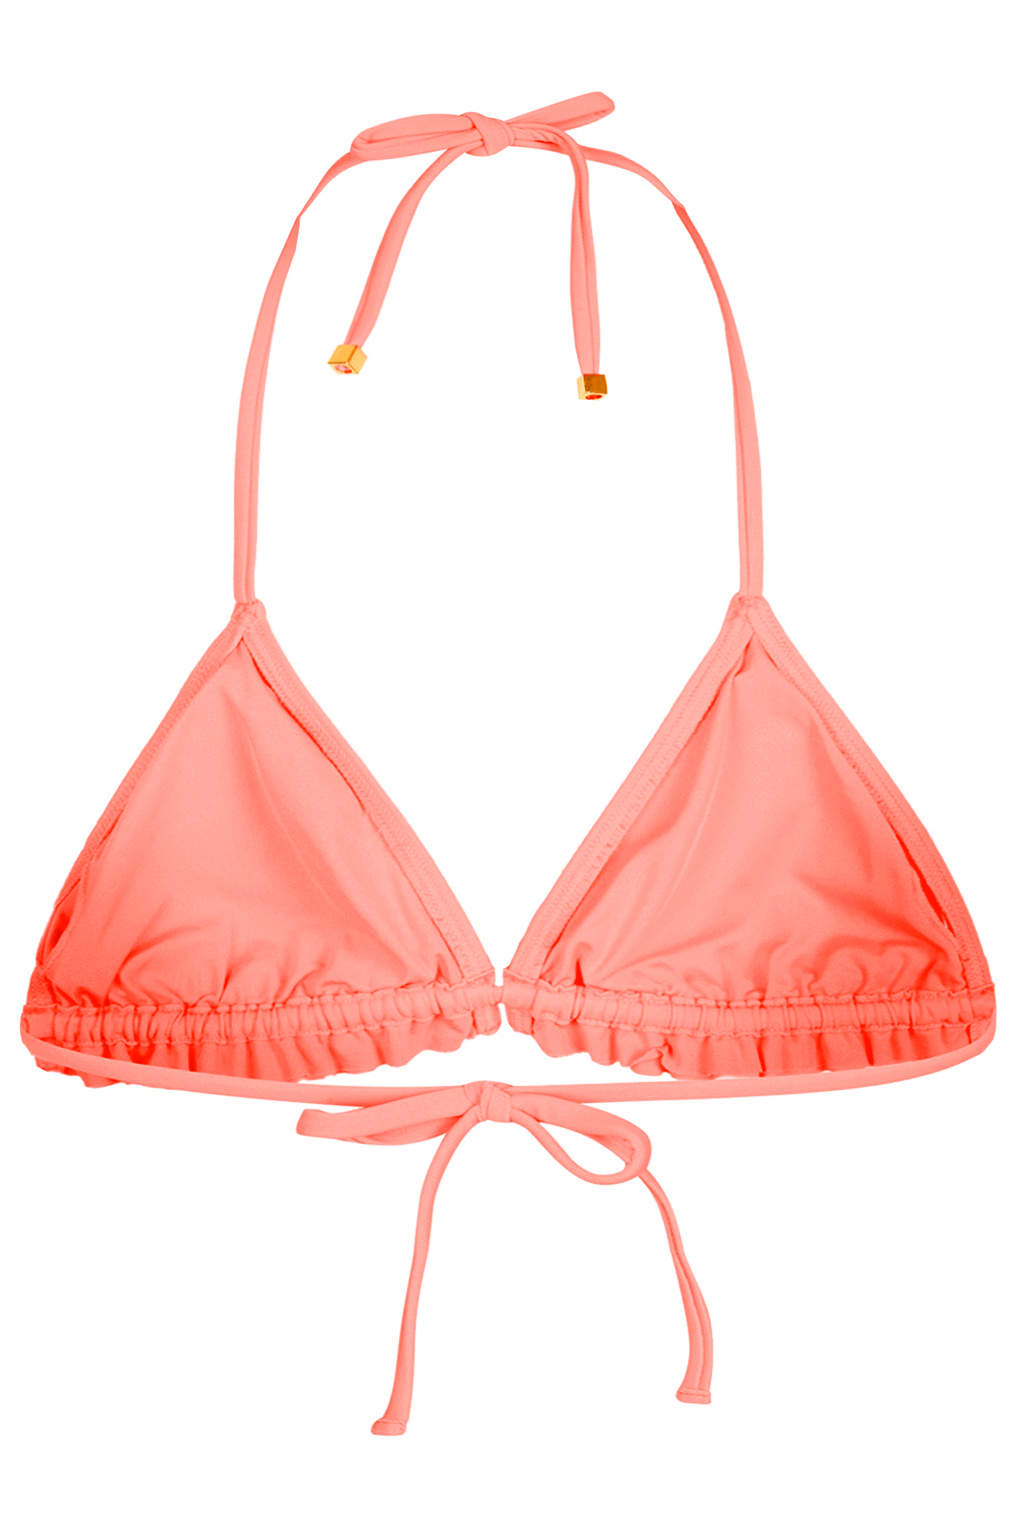 Lyst - Topshop Sunset Pink Frill Triangle Bikini Top in Pink